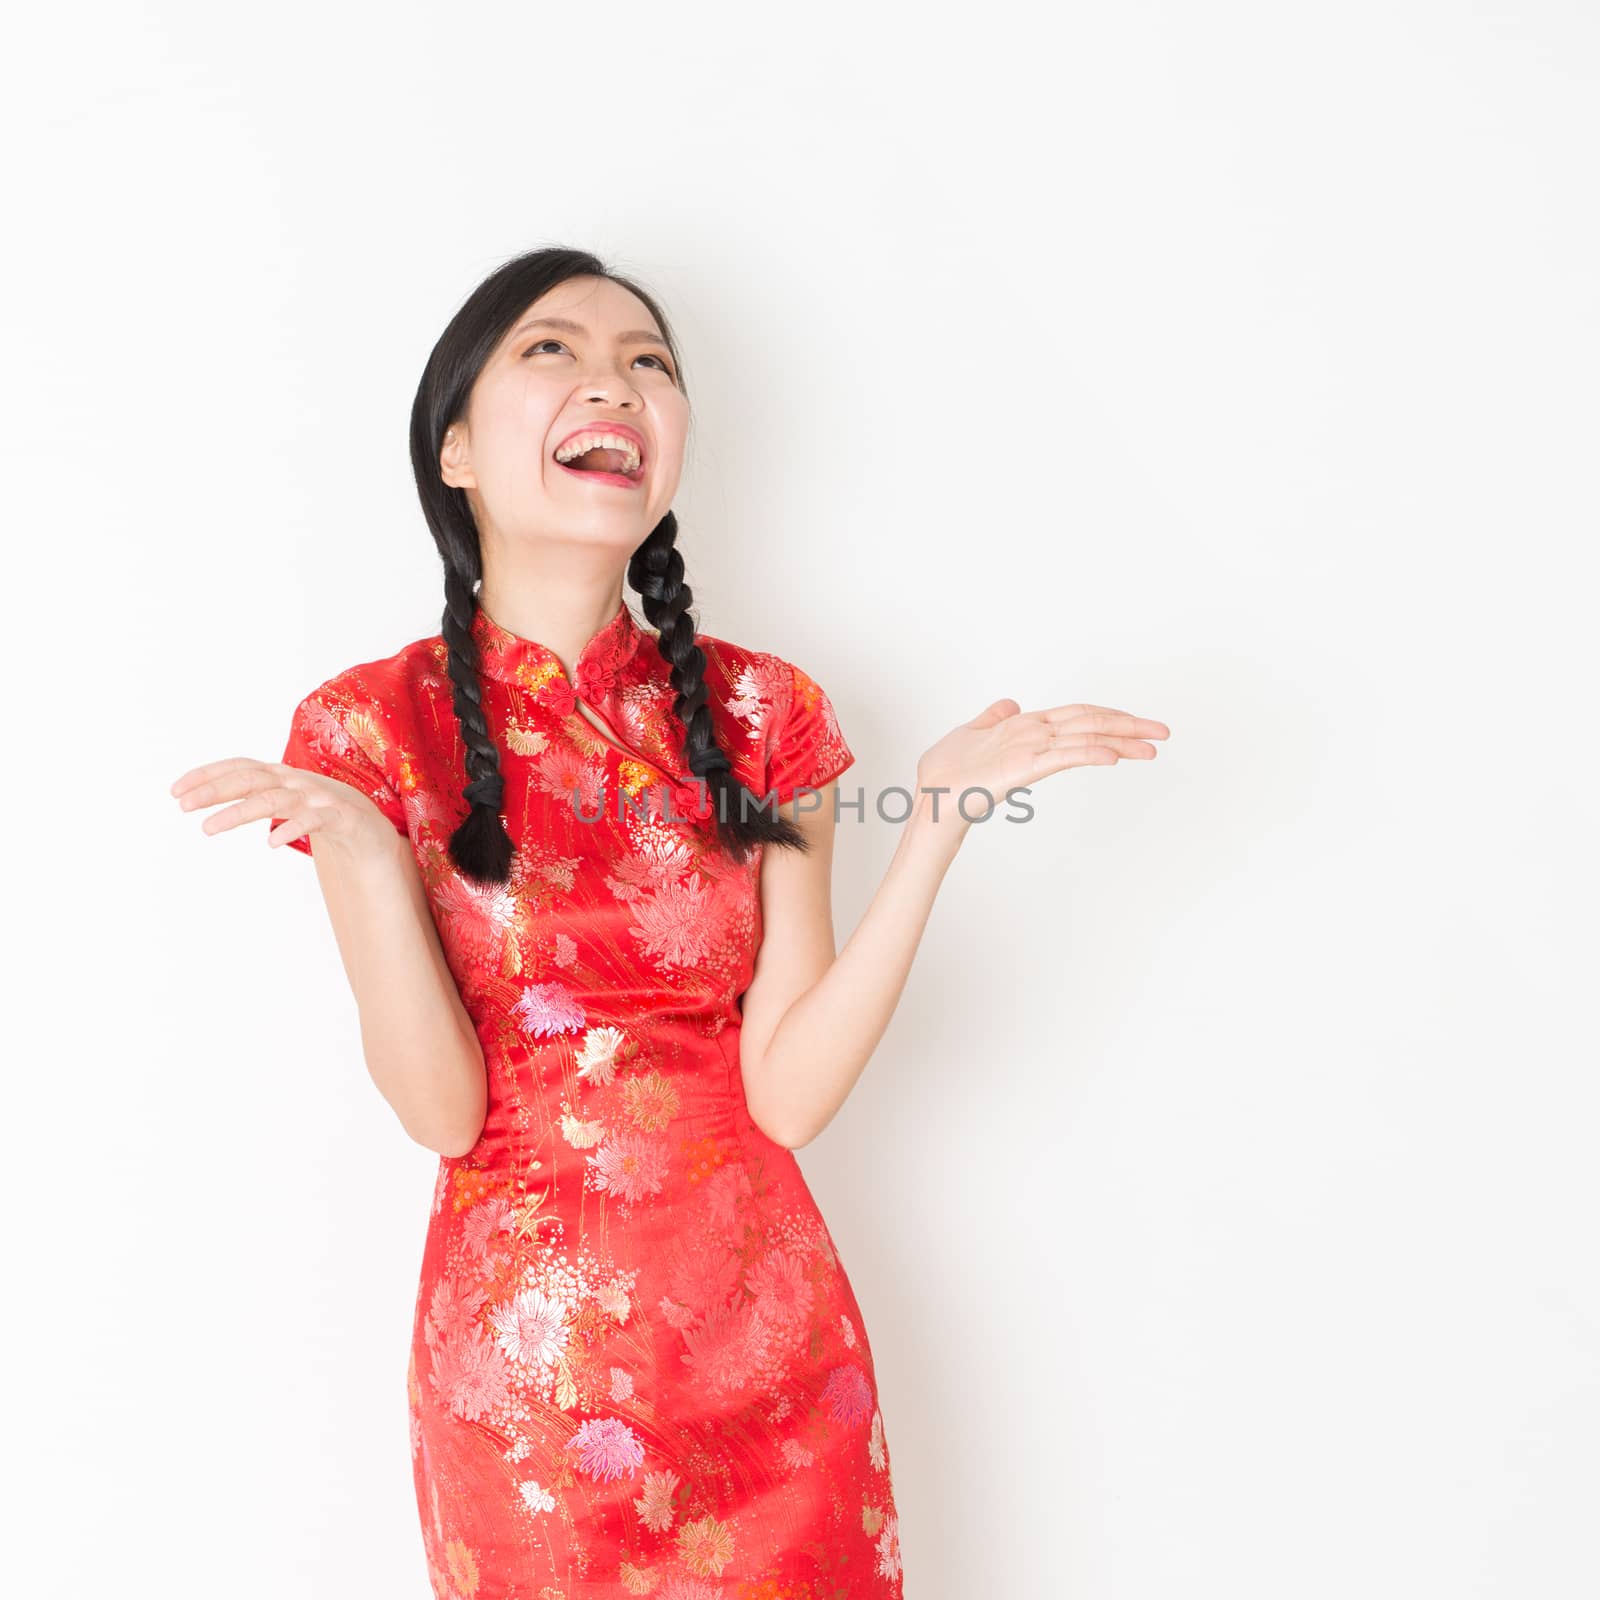 Portrait of surprise young Asian girl in traditional qipao dress with hand opened and looking up, celebrating Chinese Lunar New Year or spring festival, standing on plain background.